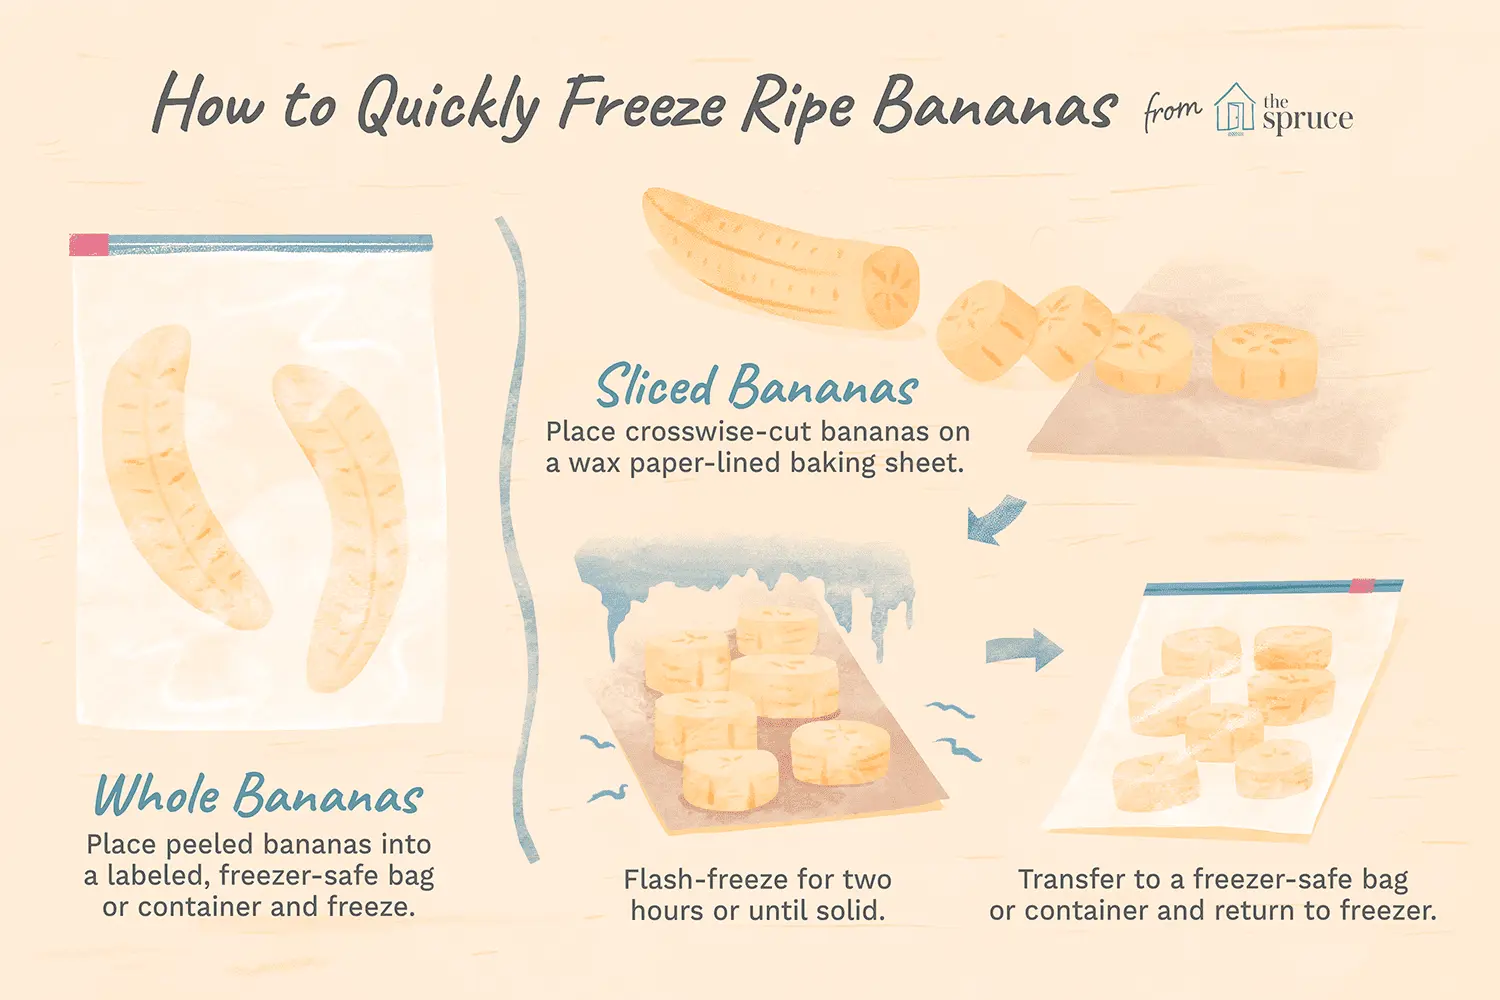 How to Quickly Freeze Ripe Bananas